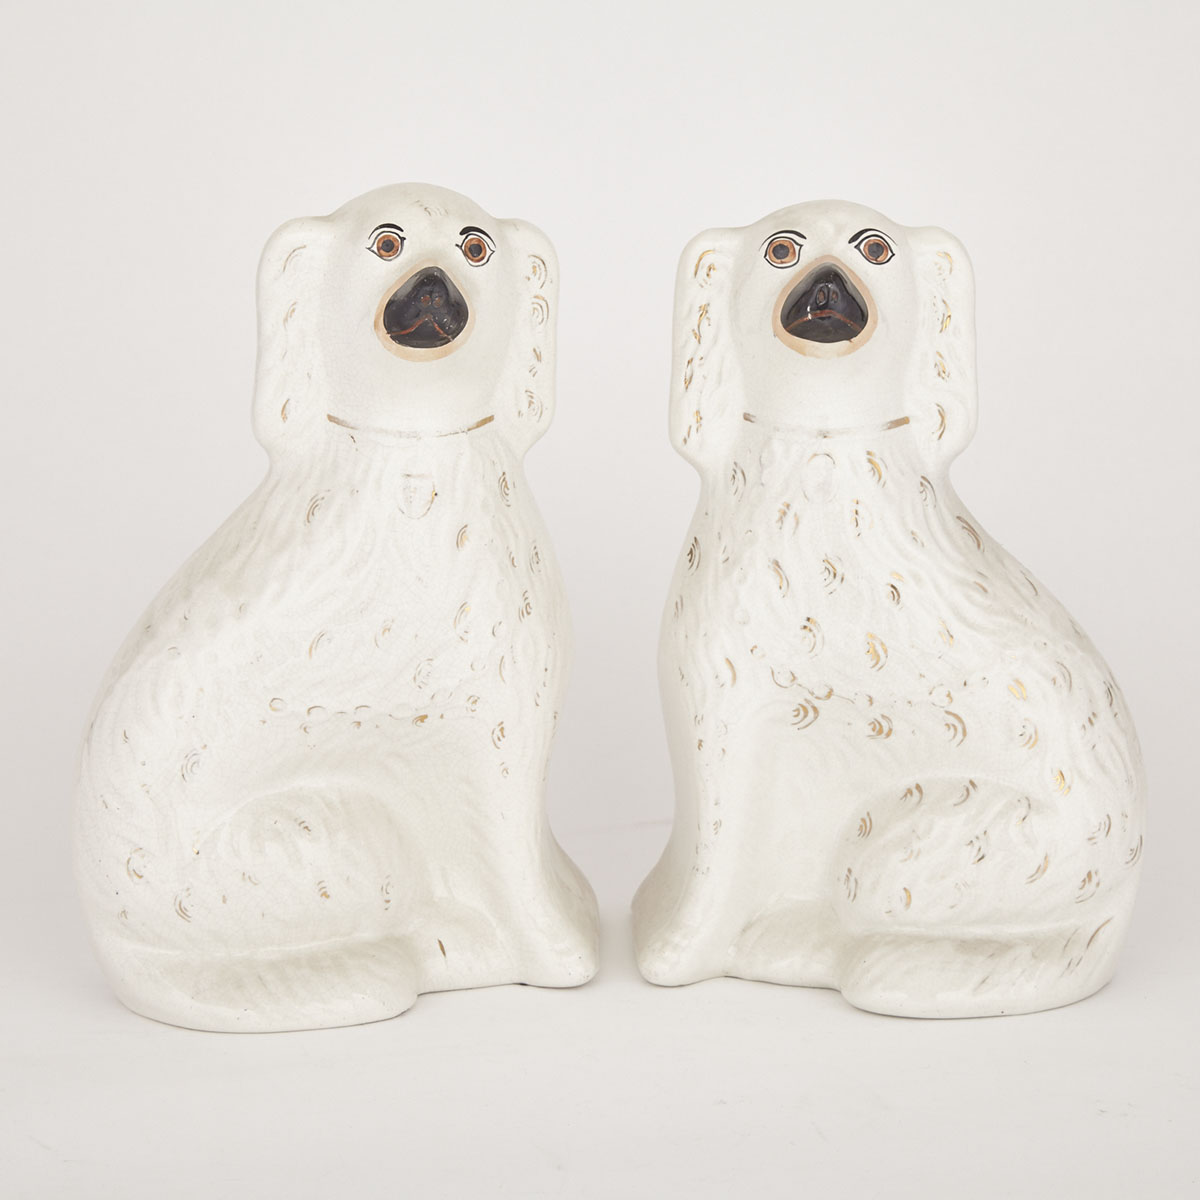 Pair of Staffordshire Dogs, 19th century